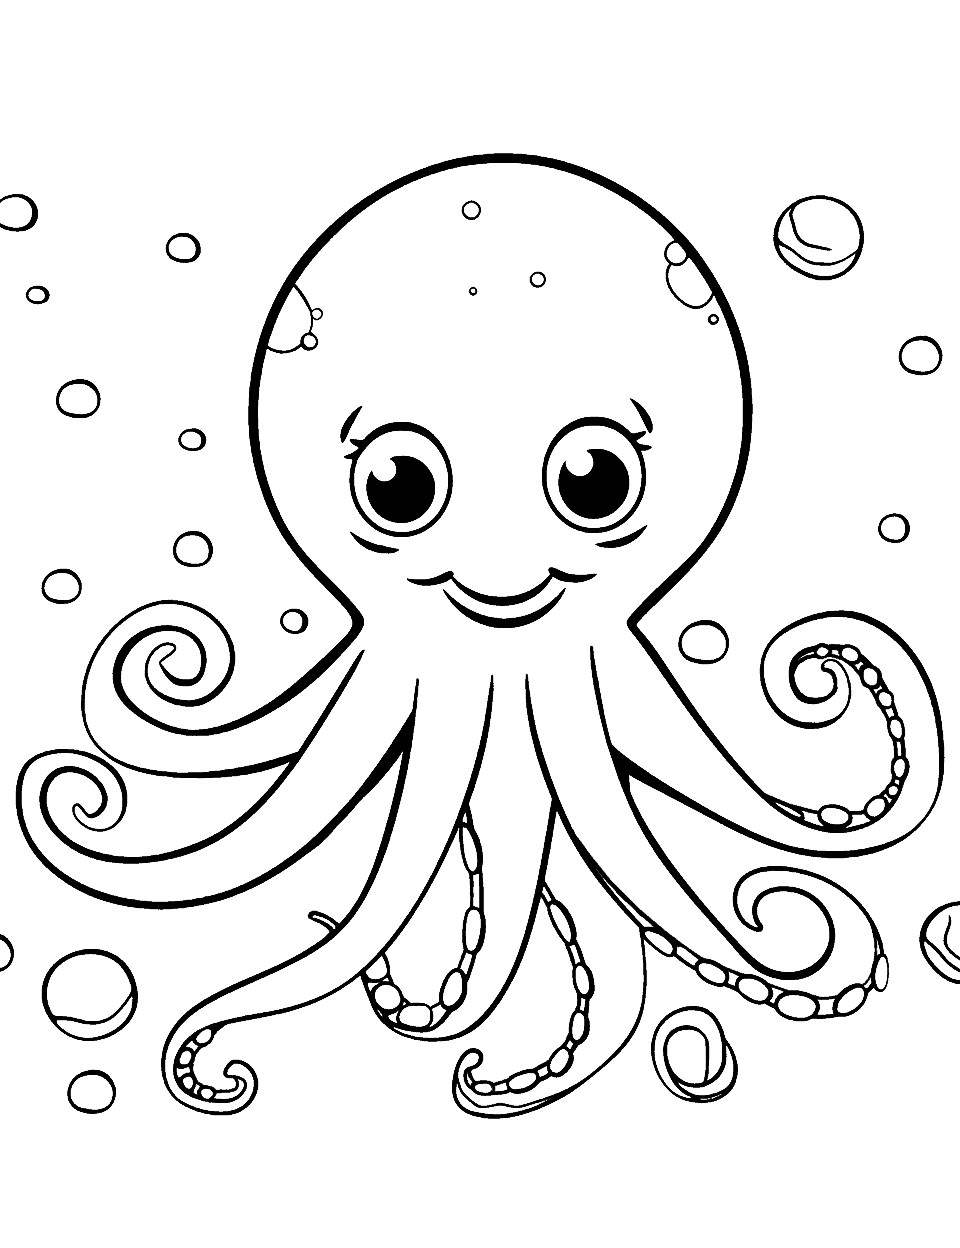 Cute Octopus in the Ocean Coloring Page - A smiling octopus swimming in the deep blue sea.